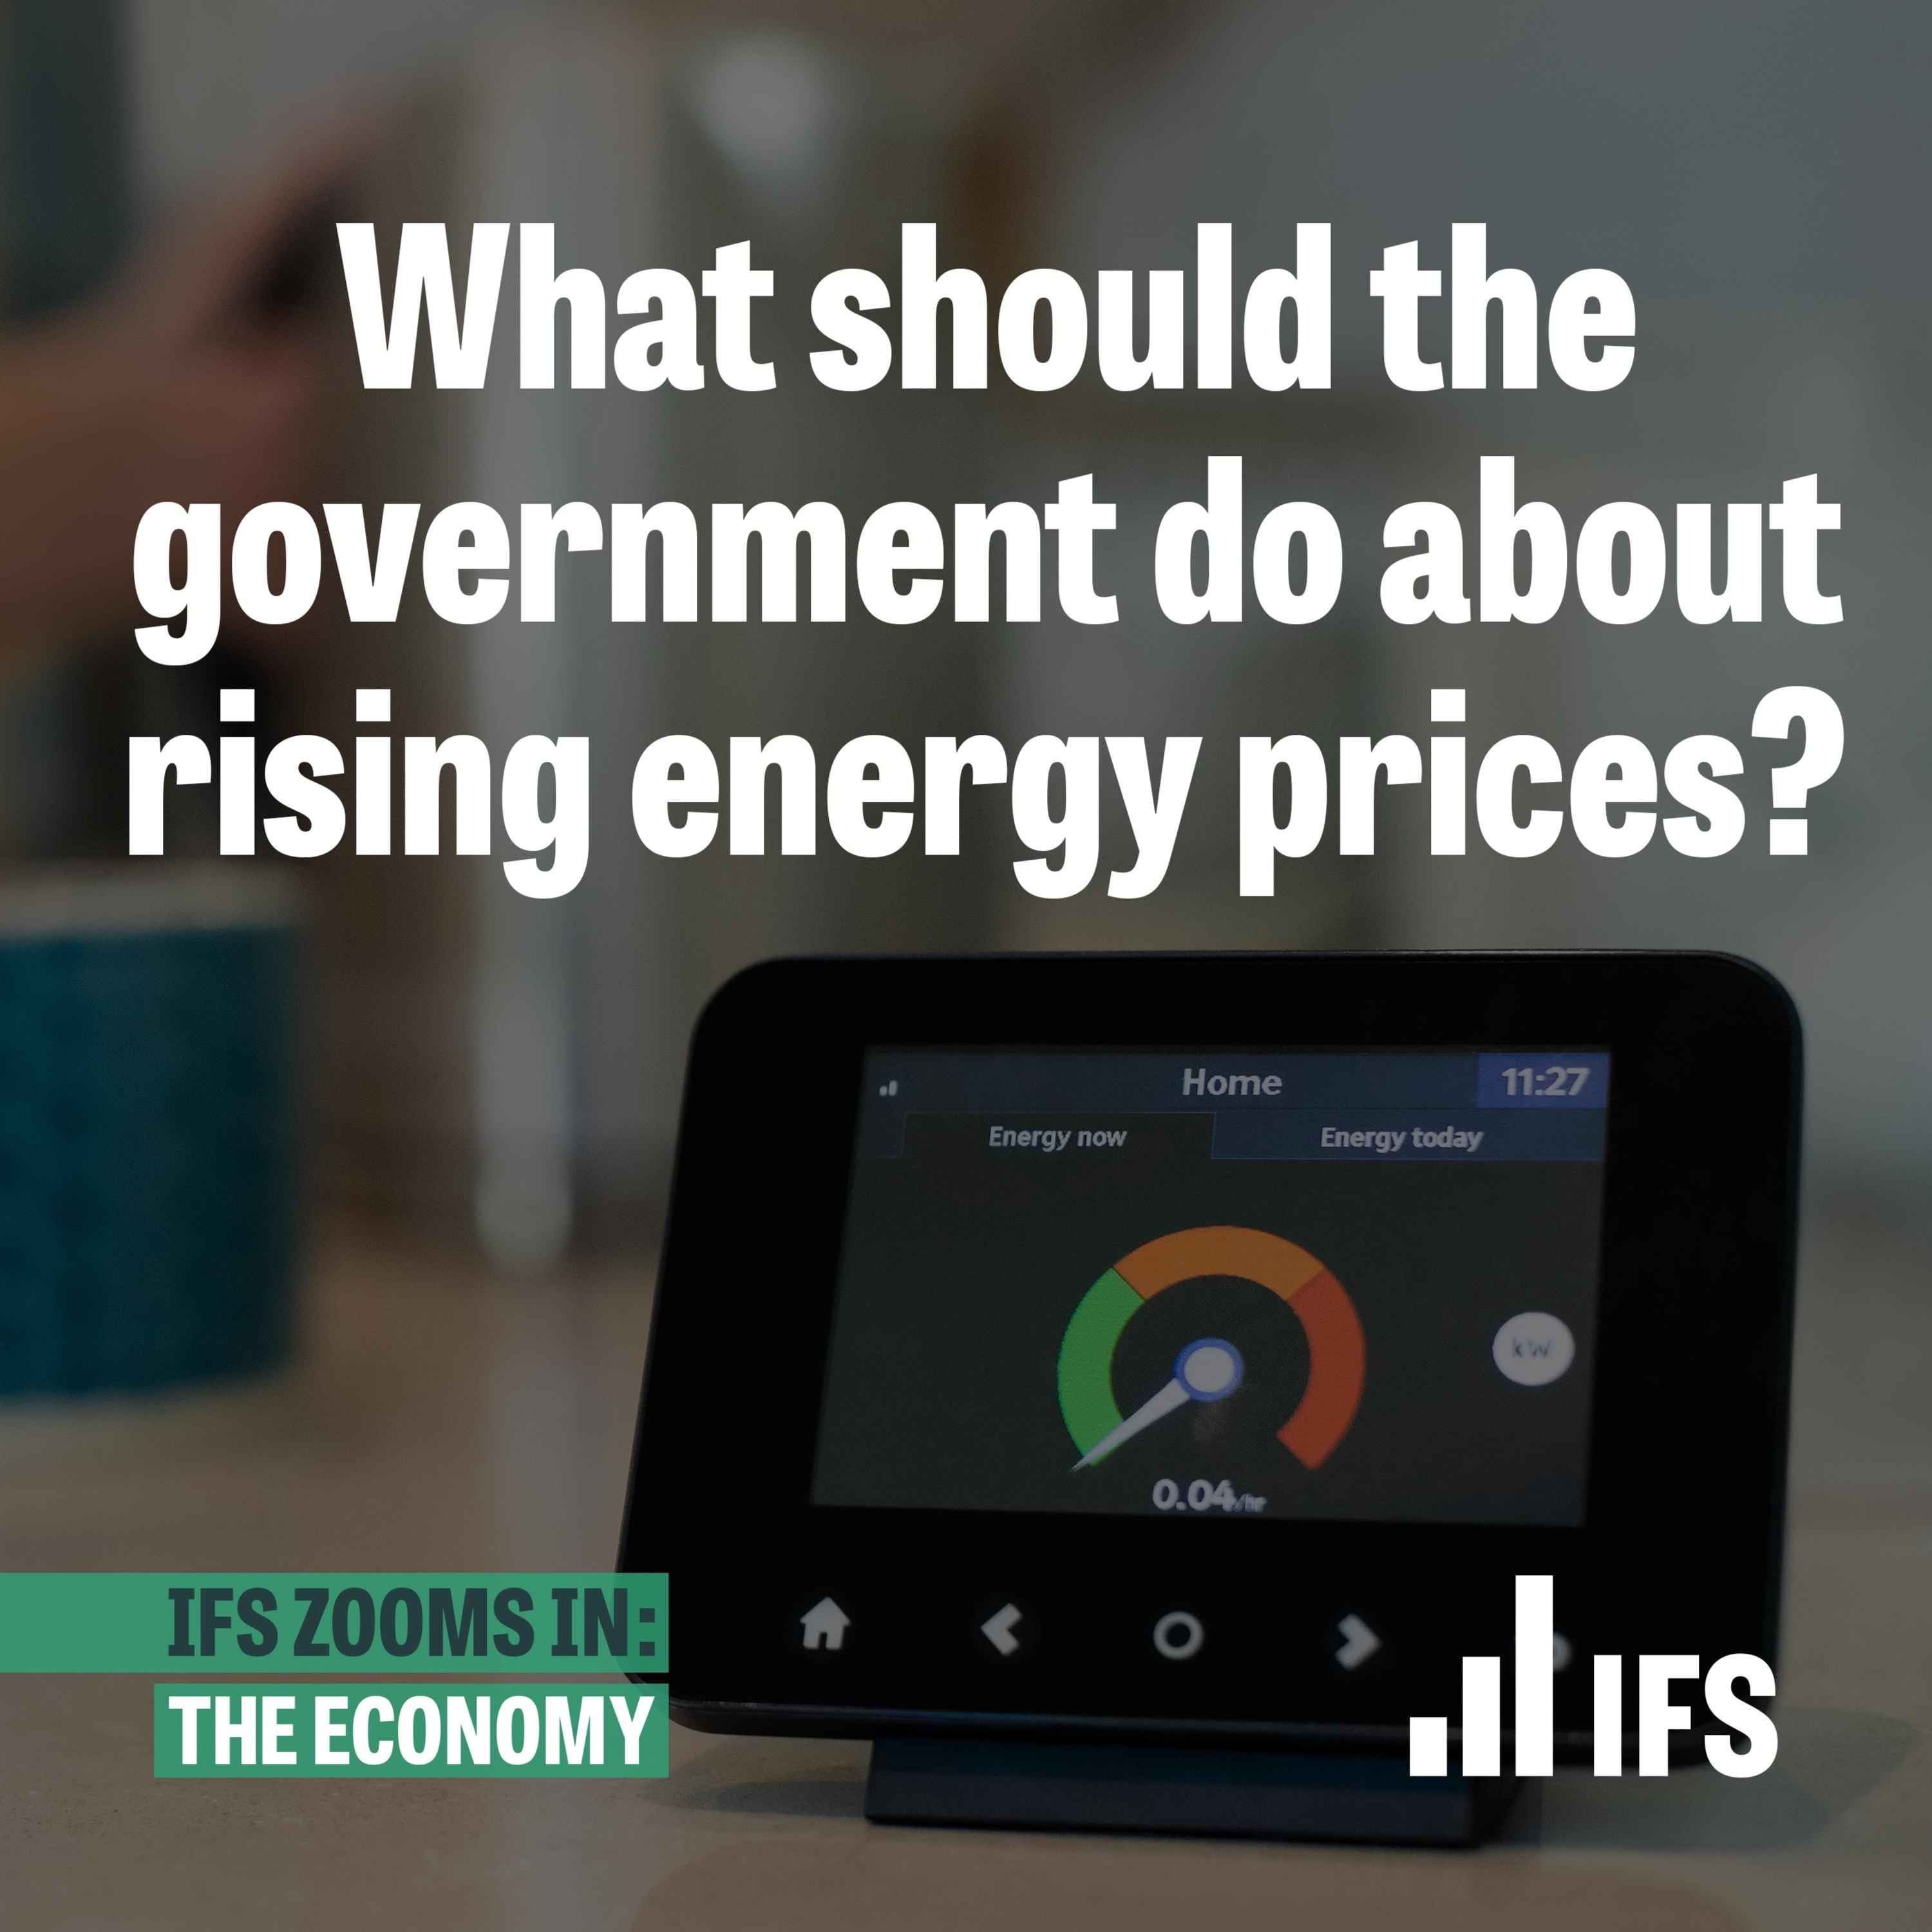 What should the government do about rising energy prices?